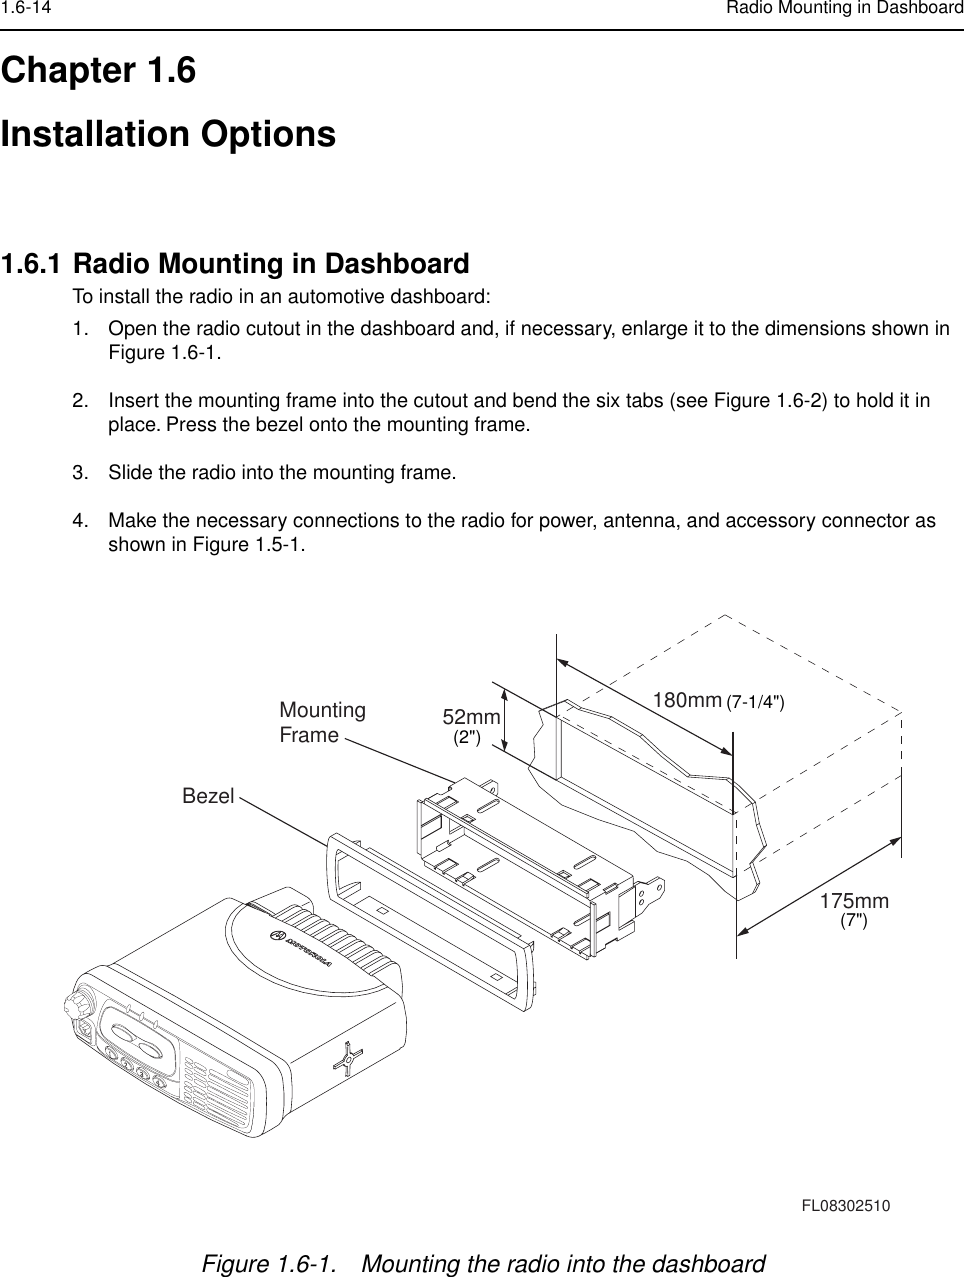 1.6-14 Radio Mounting in DashboardChapter 1.6Installation Options1.6.1 Radio Mounting in DashboardTo install the radio in an automotive dashboard:1. Open the radio cutout in the dashboard and, if necessary, enlarge it to the dimensions shown in Figure 1.6-1.2. Insert the mounting frame into the cutout and bend the six tabs (see Figure 1.6-2) to hold it in place. Press the bezel onto the mounting frame. 3. Slide the radio into the mounting frame.4. Make the necessary connections to the radio for power, antenna, and accessory connector as shown in Figure 1.5-1.Figure 1.6-1. Mounting the radio into the dashboard BezelMountingFrame175mm180mm52mmFL08302510(7-1/4&quot;)(7&quot;)(2&quot;)